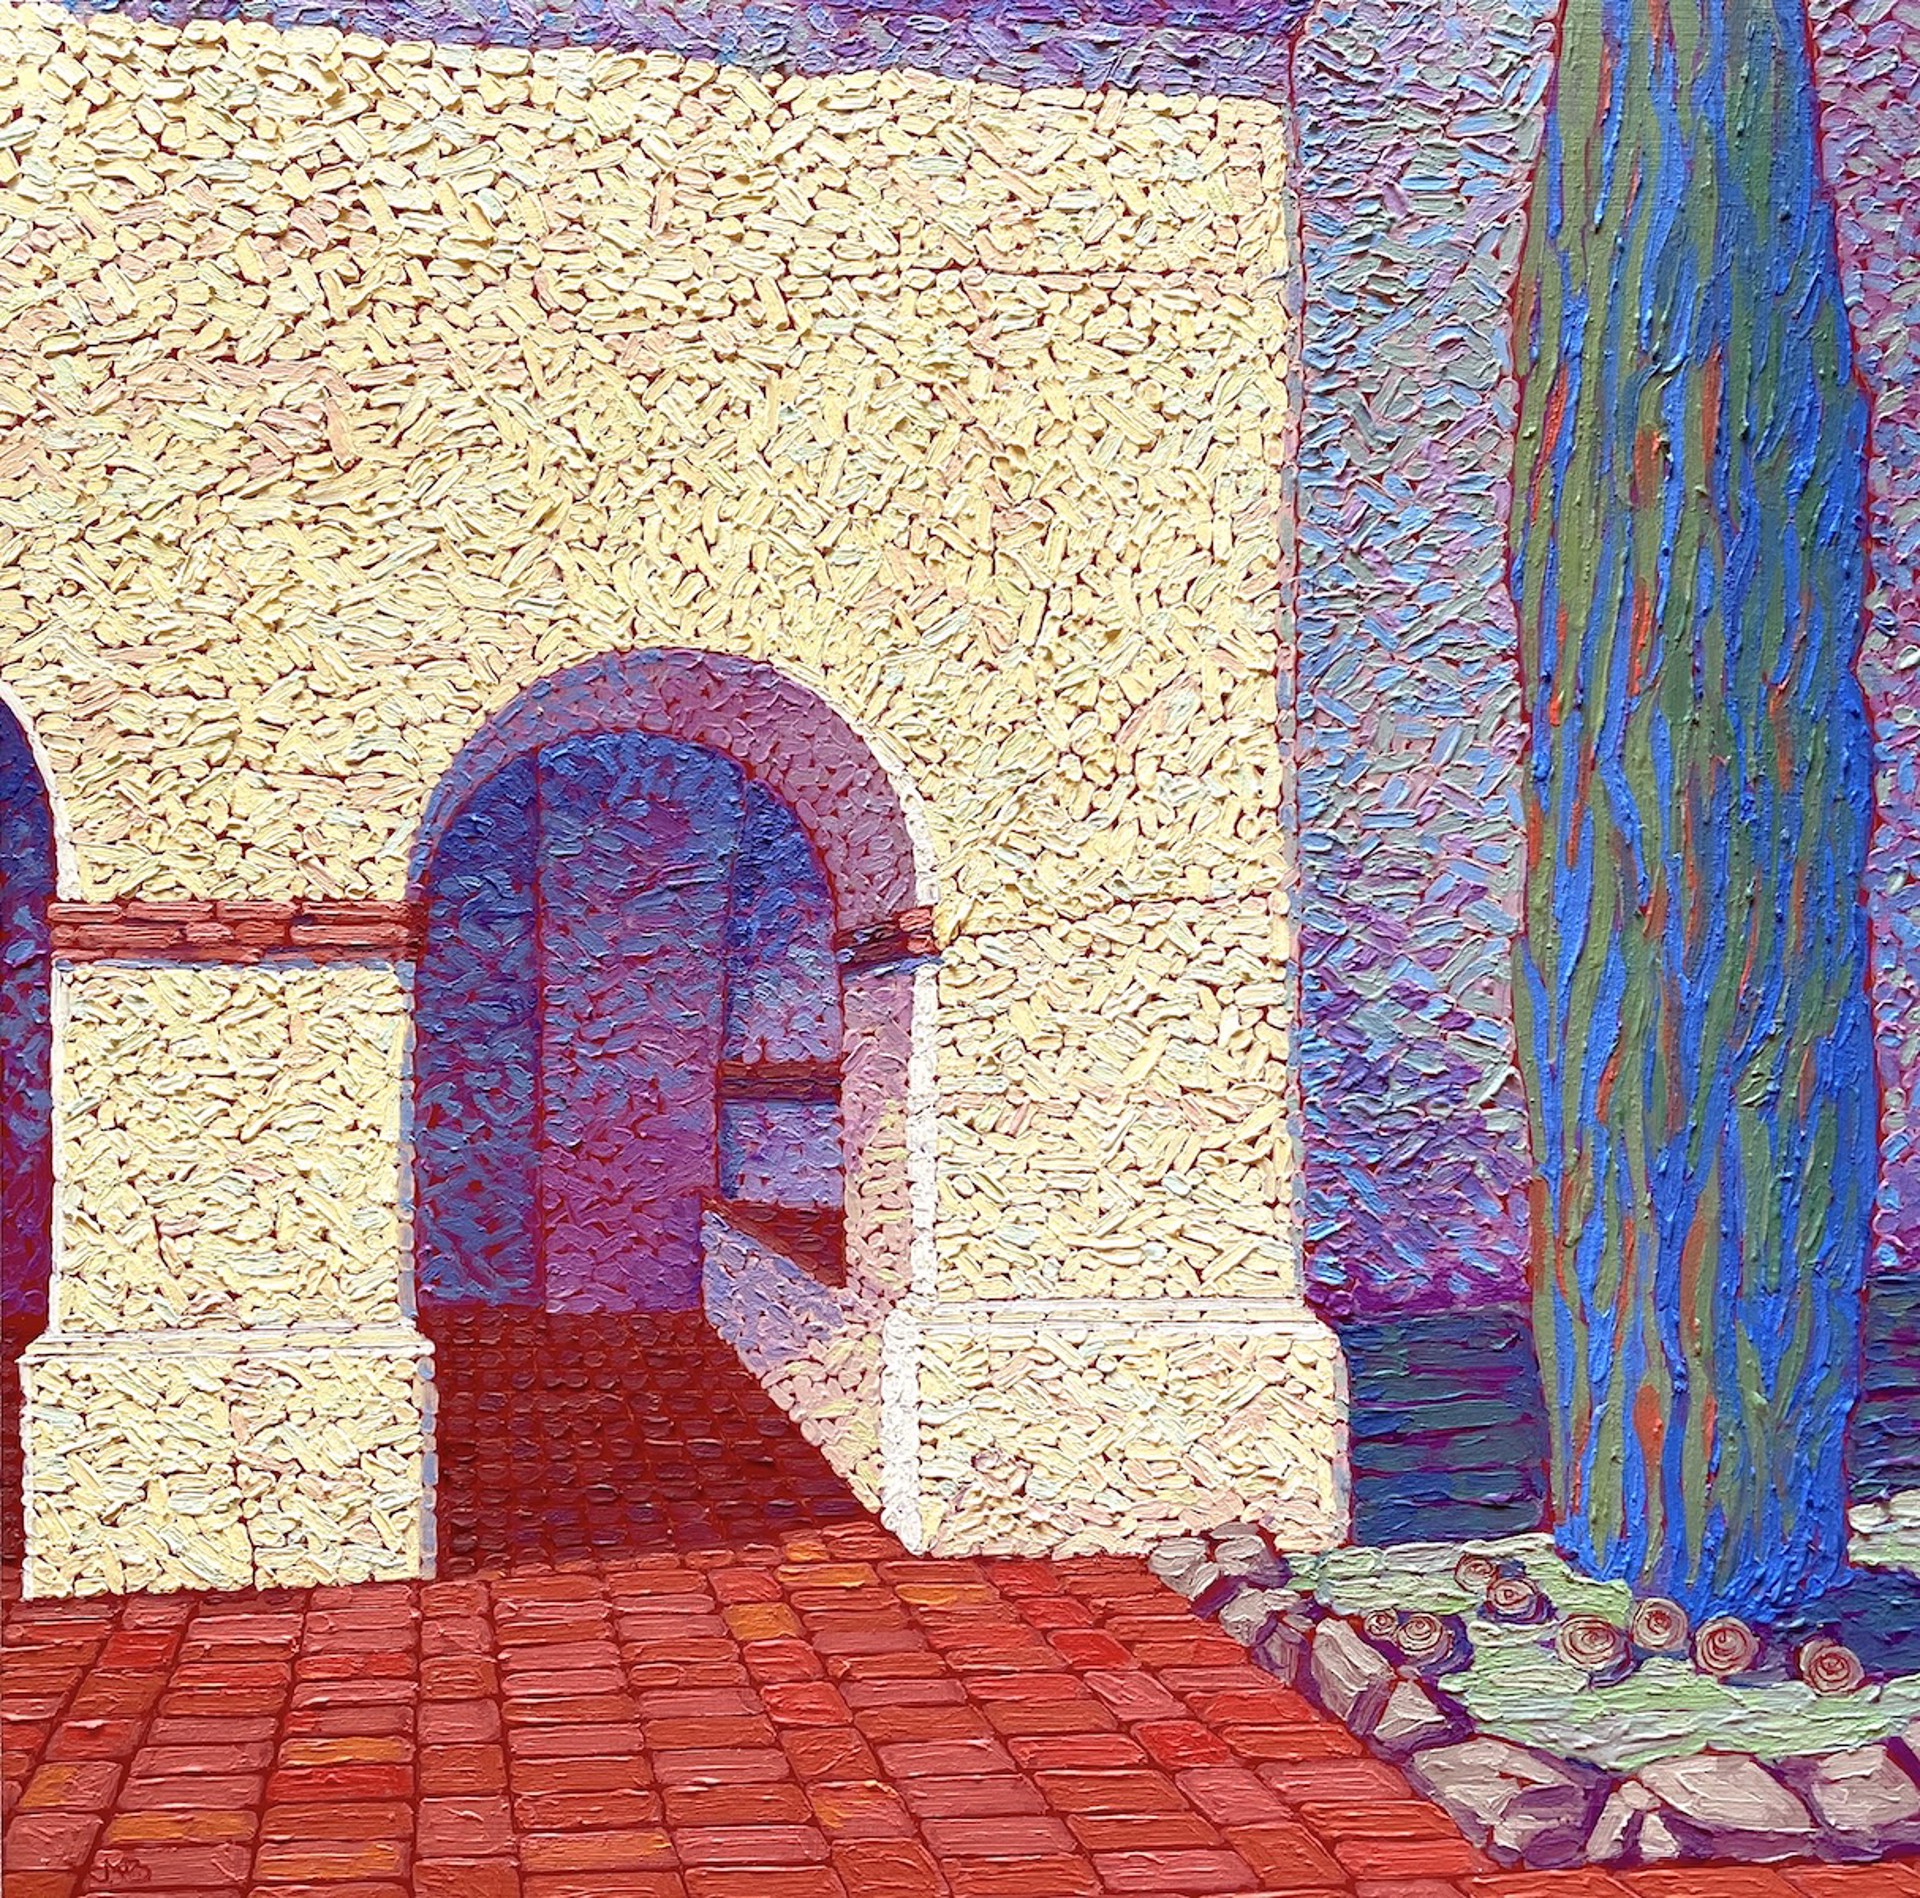 Archway with Cypress, Mission San Juan Bautista by Jeffrey Becom